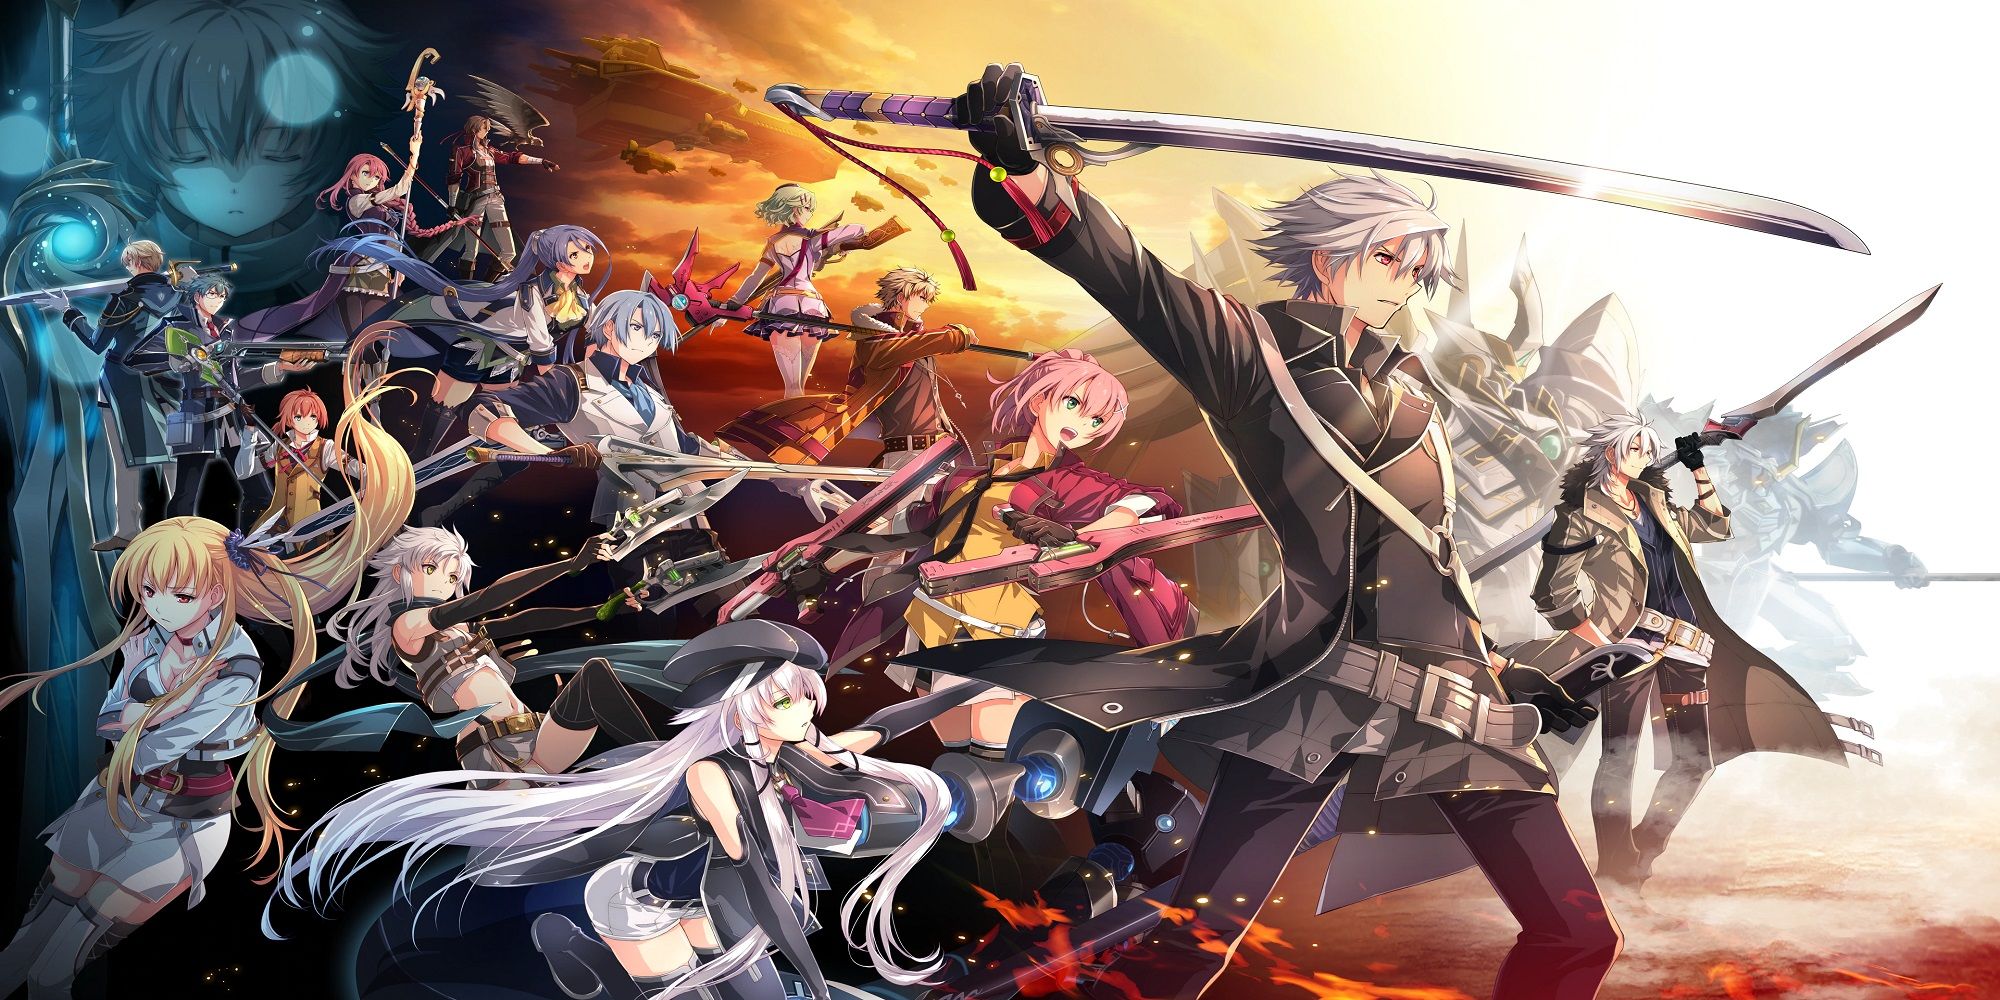 A photo of the massive cast of the Trails of Cold Steel IV roster.